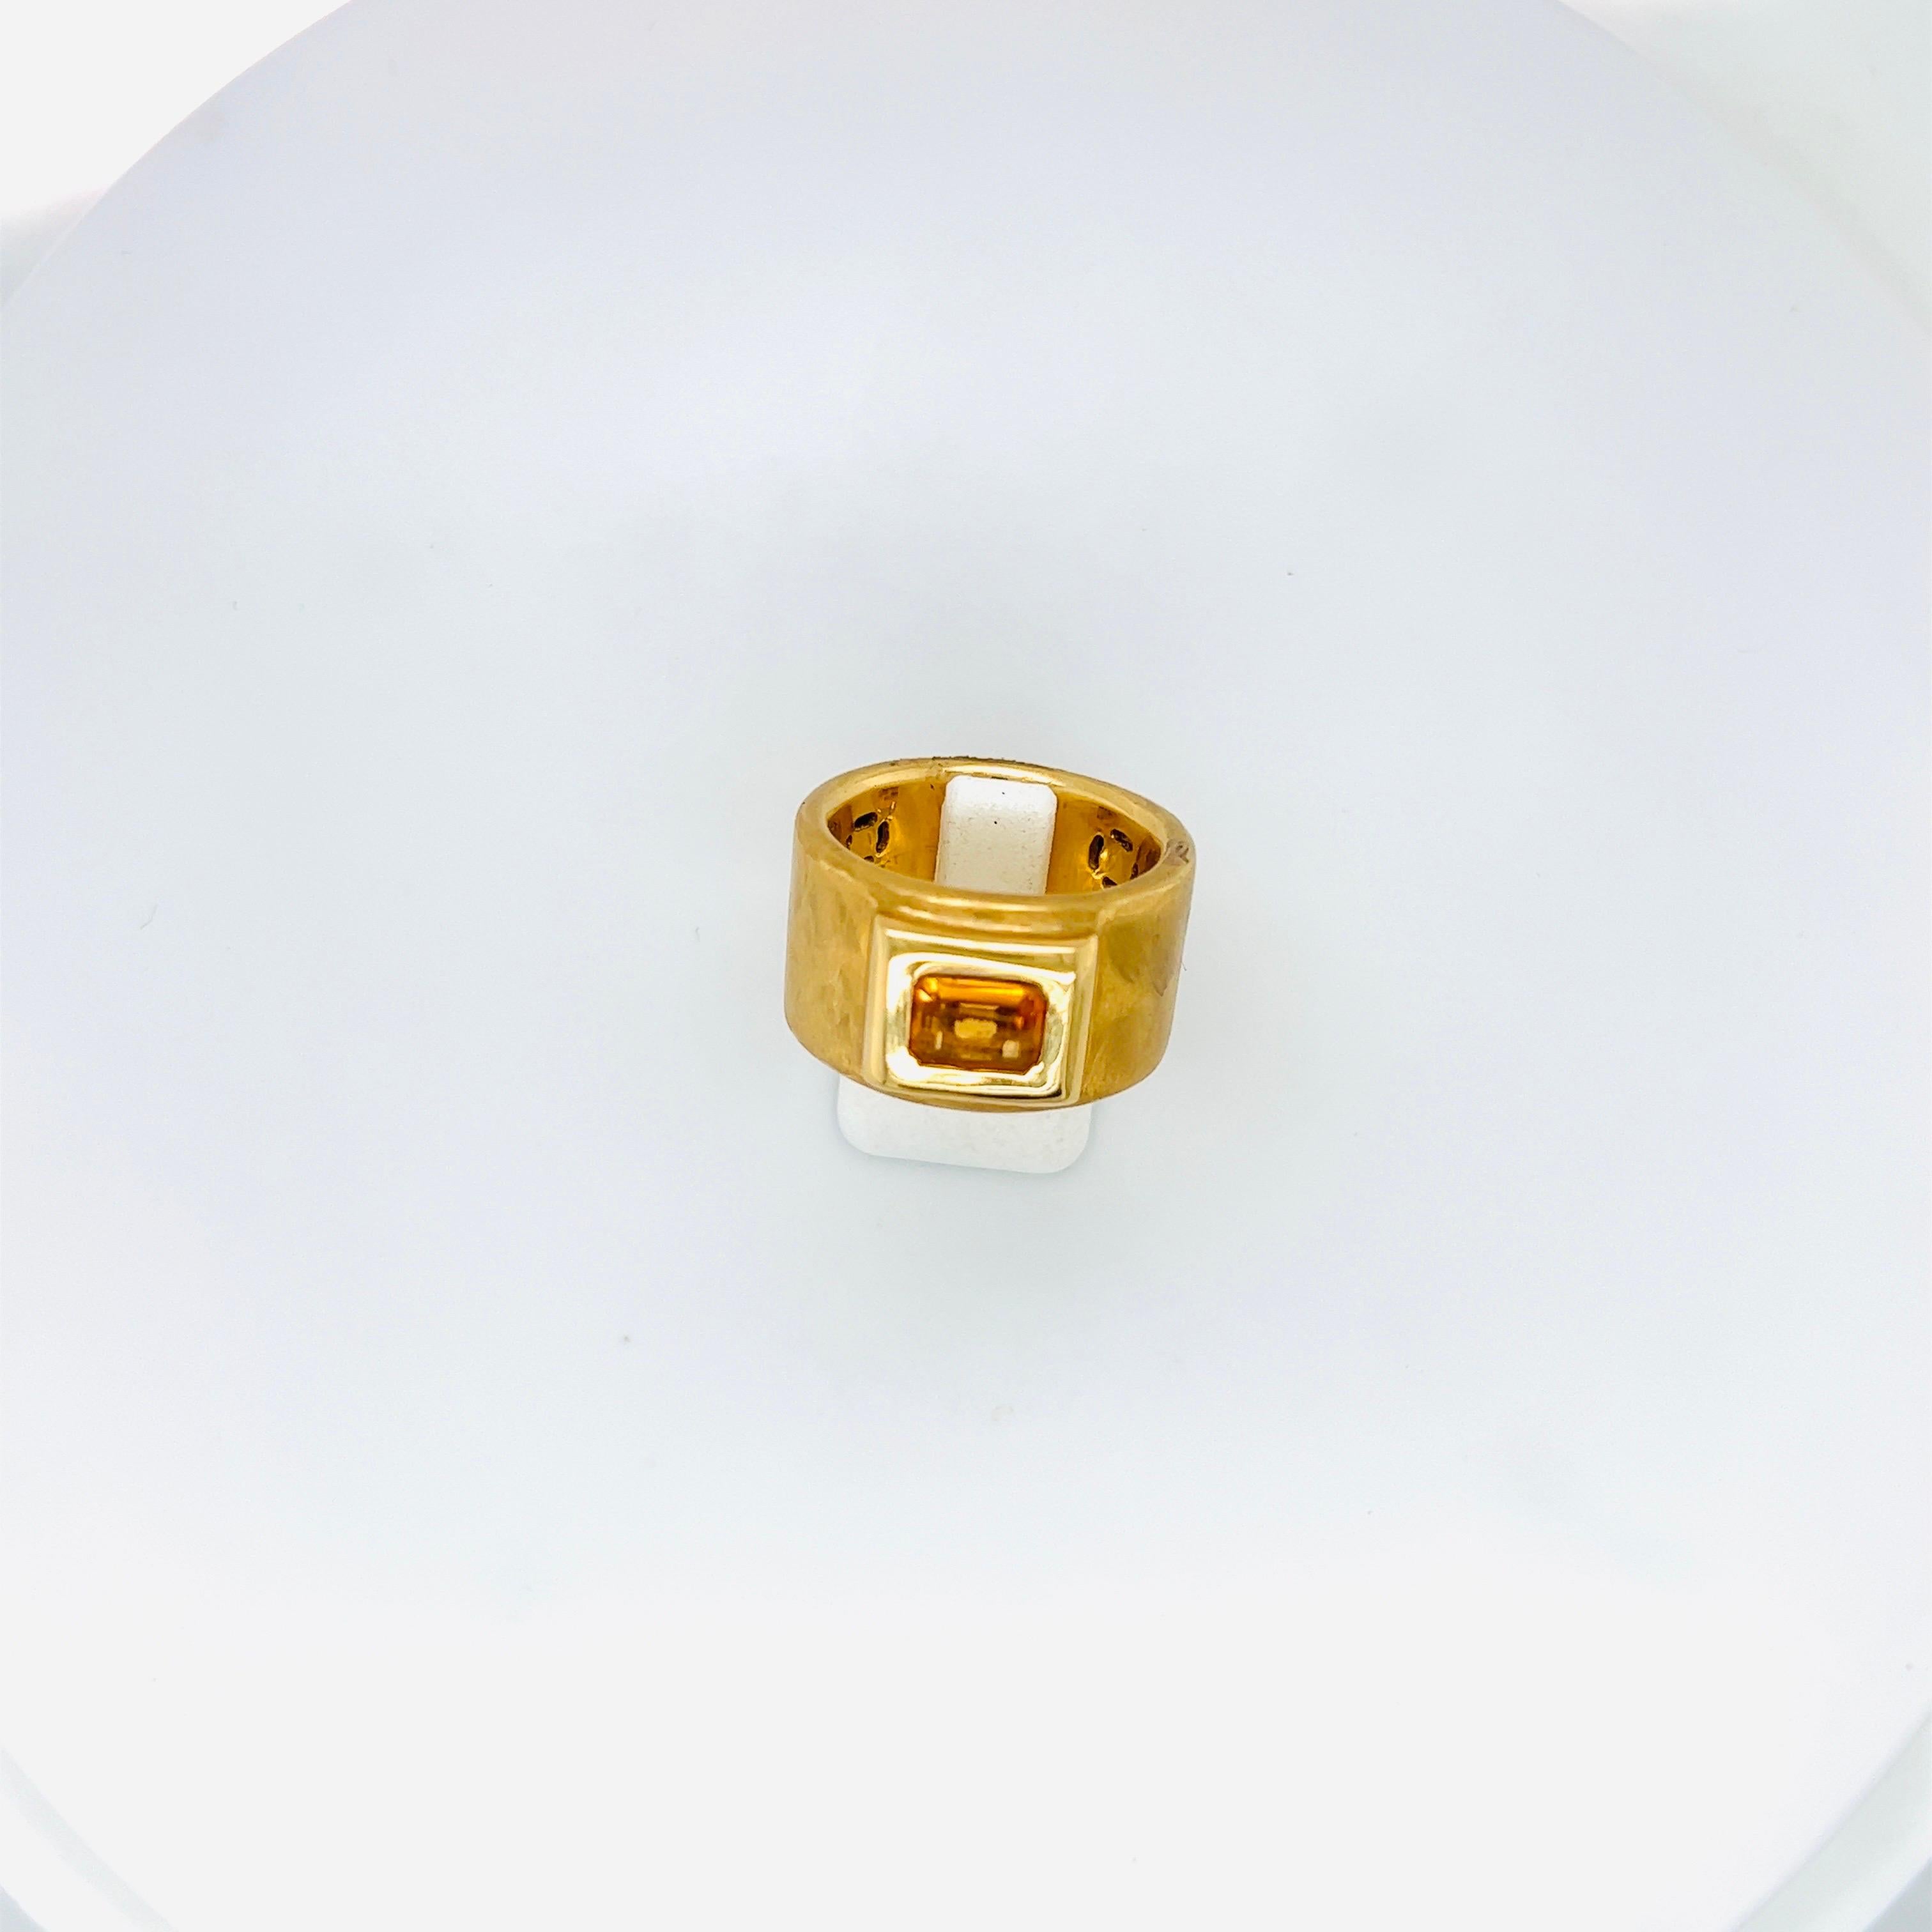 Designed by Roberto Coin of Italy, thi 18 karat yellow gold wide band ring is crafted in a satin finish. The ring centers an emerald cut citrine stone in a raised yellow gold bezel setting.
Stamped Italy 18k
Ring size 7